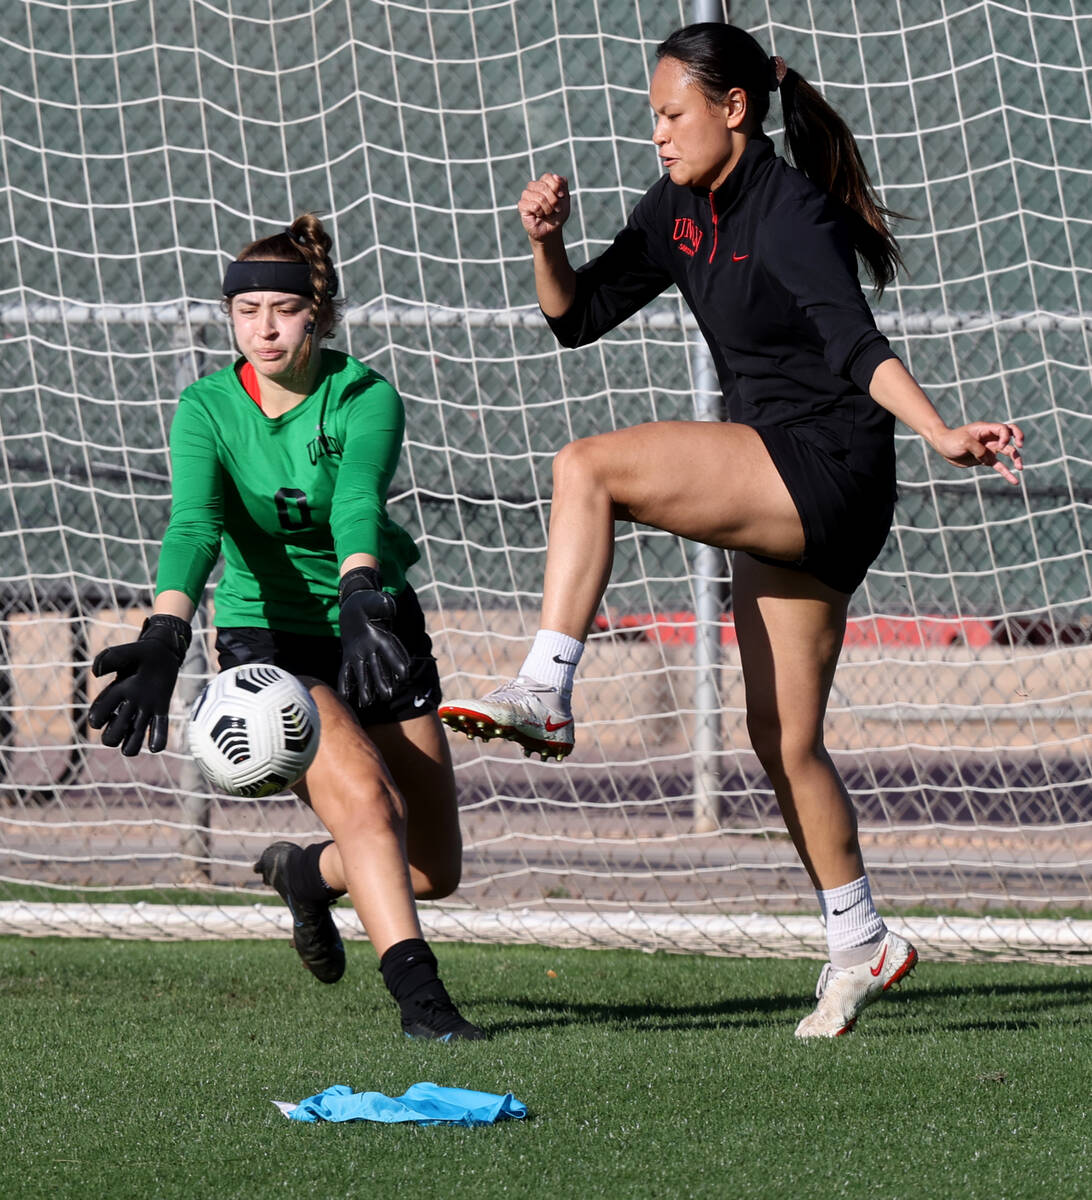 Hevanilea Haunga attempts to move a corner kick into the goal as goalkeeper Riley Liebsack defe ...